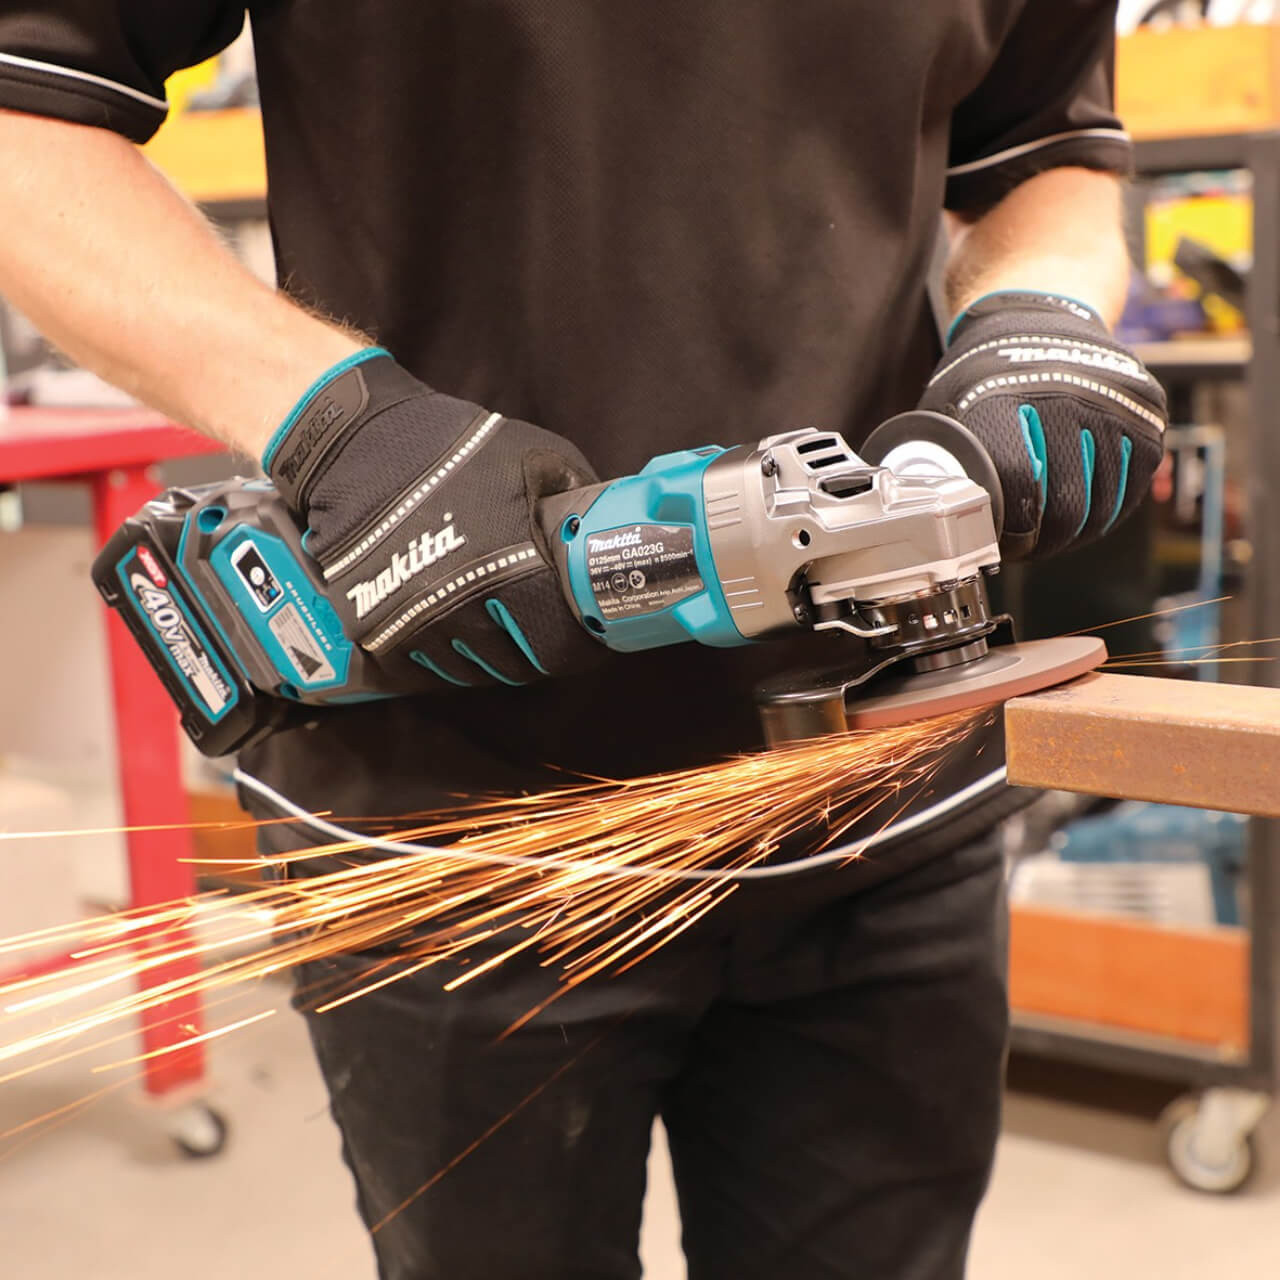 Makita 40V Max BRUSHLESS AWS* 125mm (5”) Angle Grinder. Slide Switch. Variable Speed - Tool Only